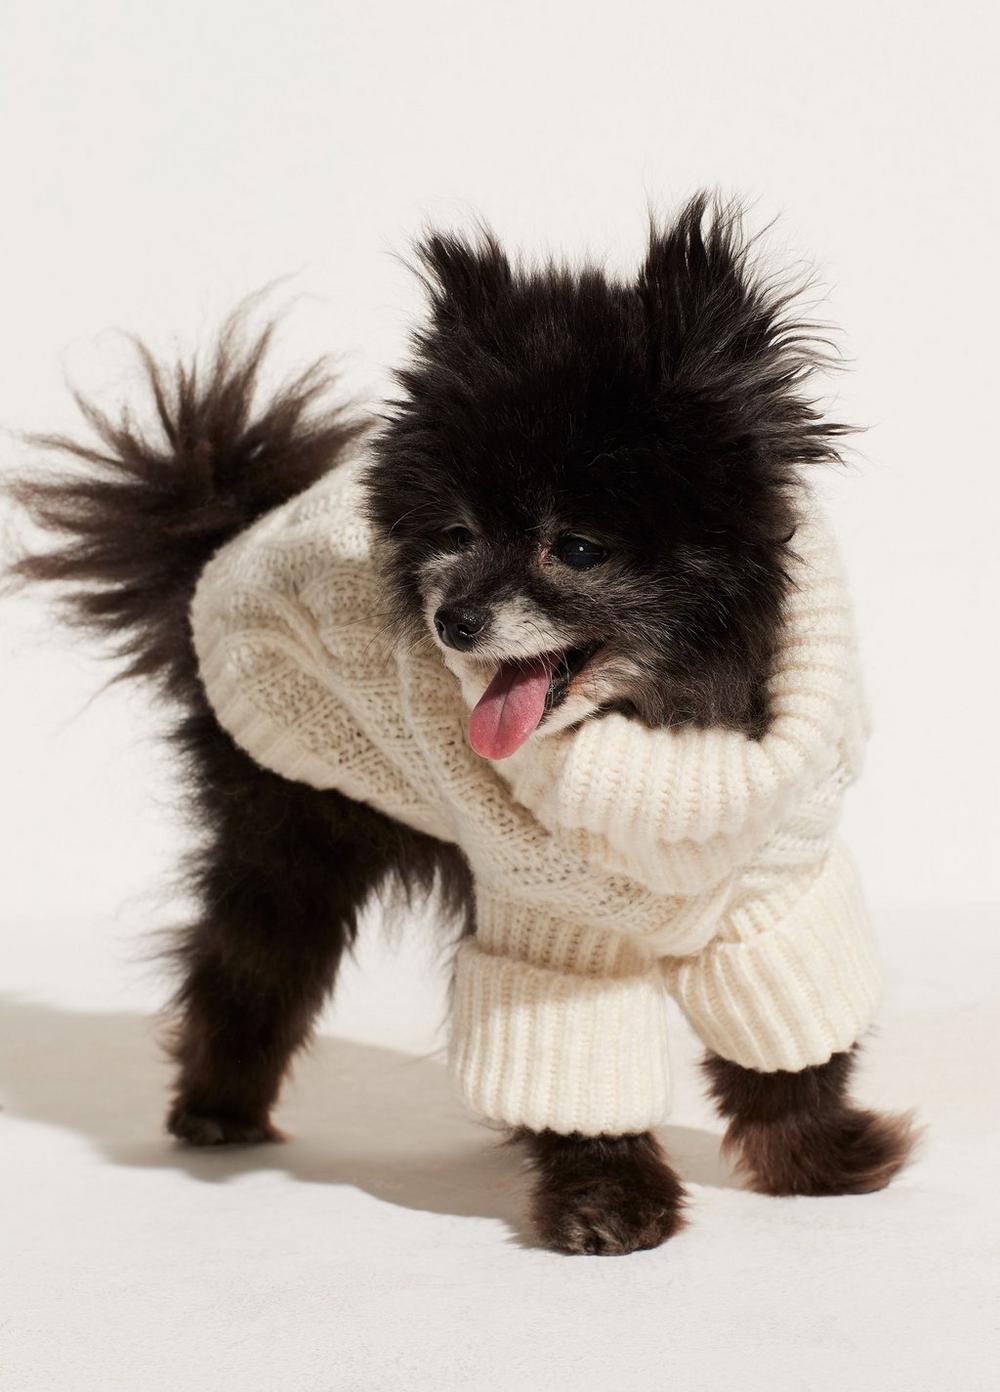 Cable Knit Dog Sweater